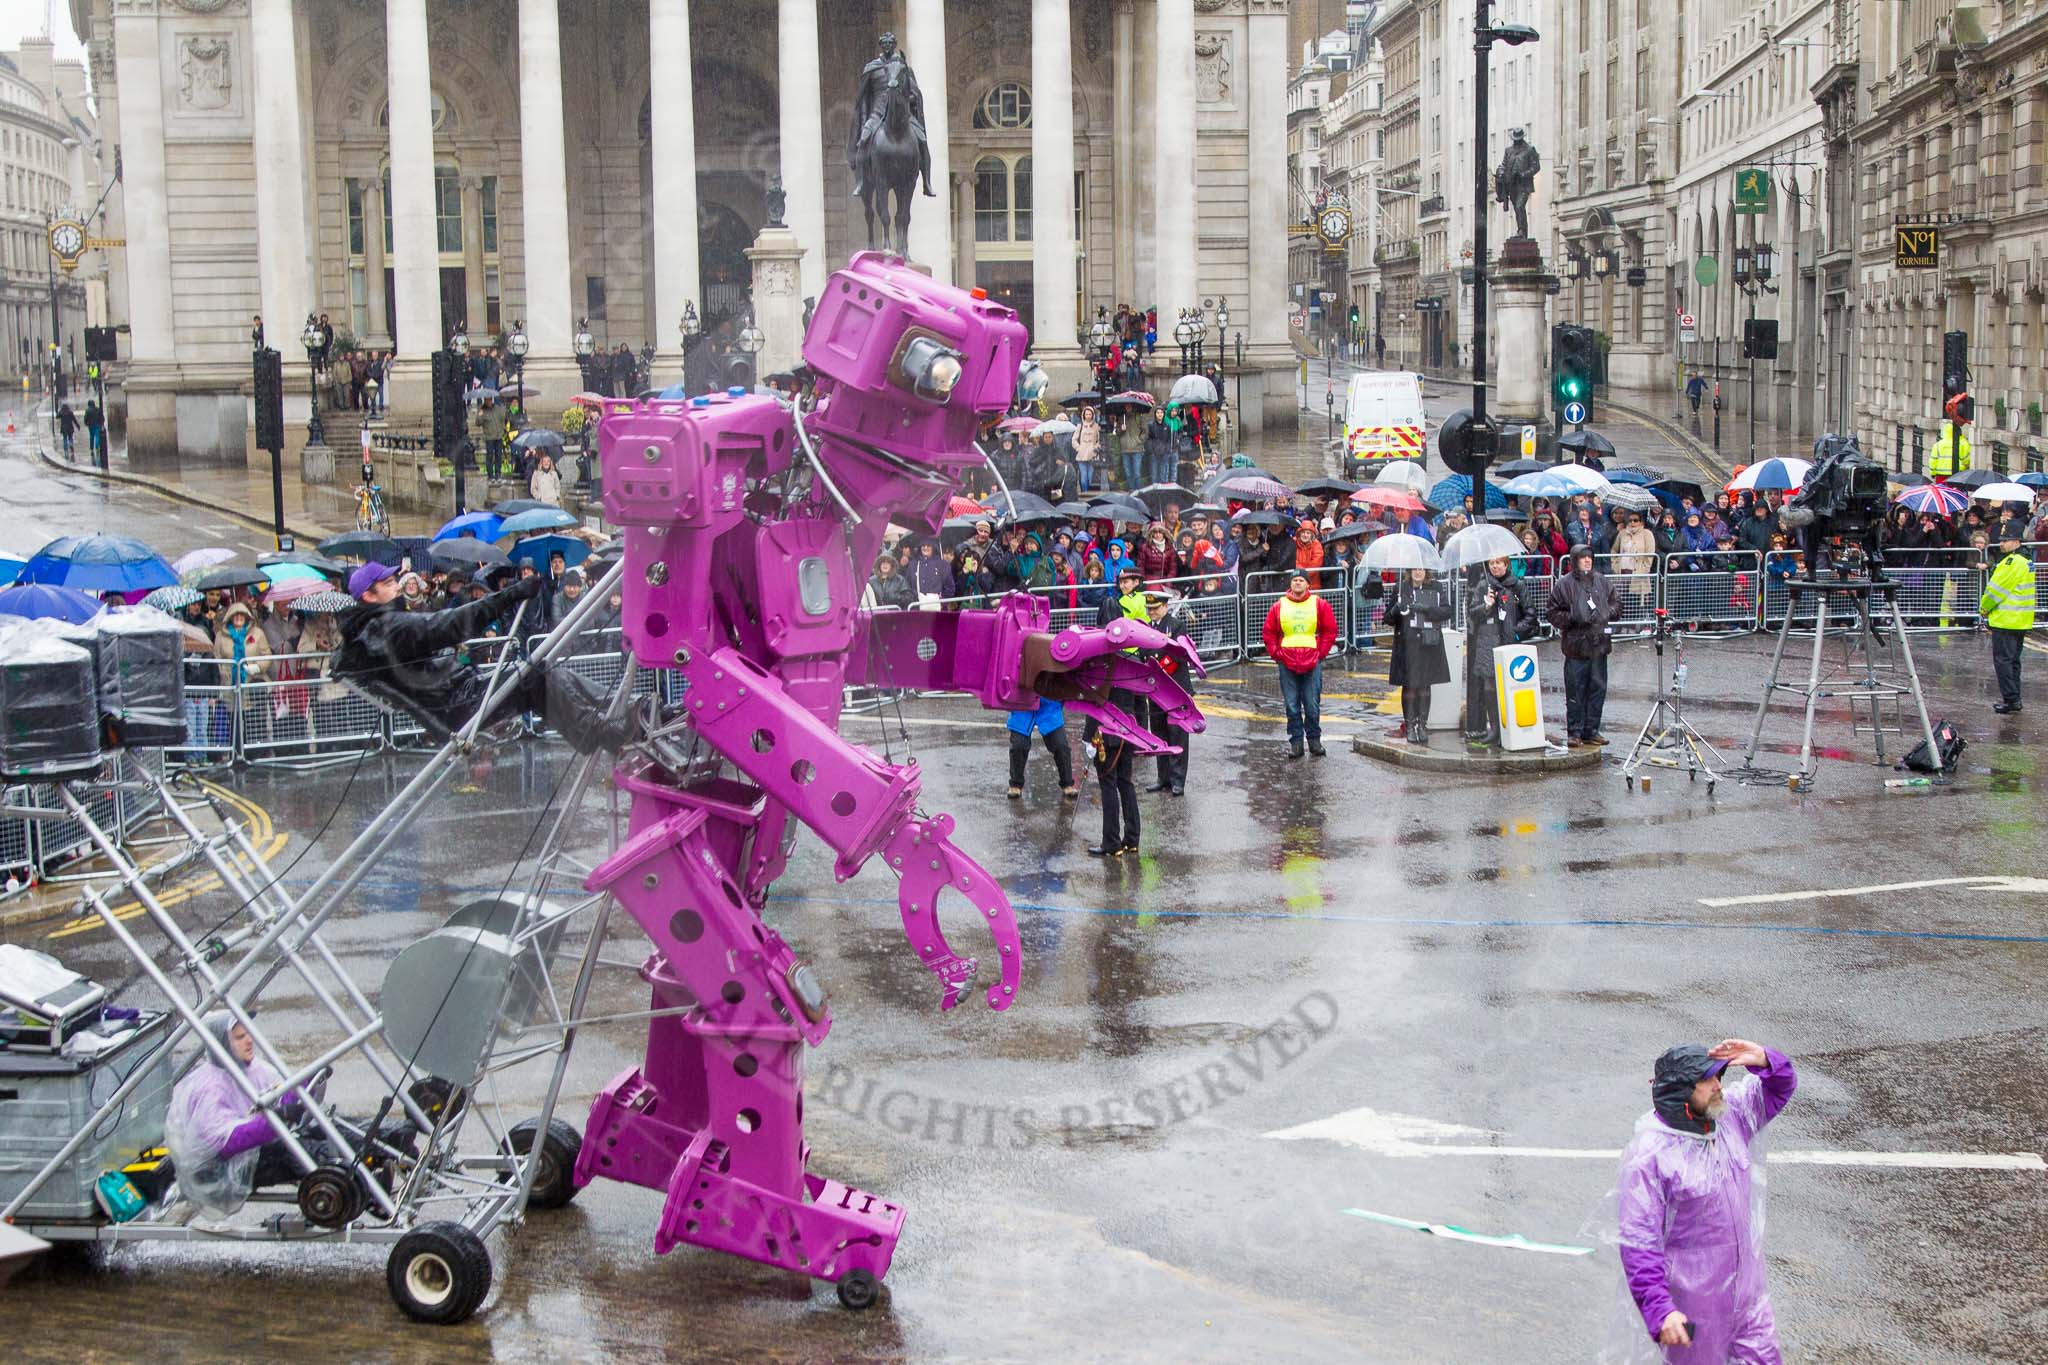 Lord Mayor's Show 2013: 59-Recycling in the City- The Binbot is joined again by his drumming street sweepers to celebrate 20th anniversary of the City's unique Clean City Awards scheme..
Press stand opposite Mansion House, City of London,
London,
Greater London,
United Kingdom,
on 09 November 2013 at 11:32, image #742